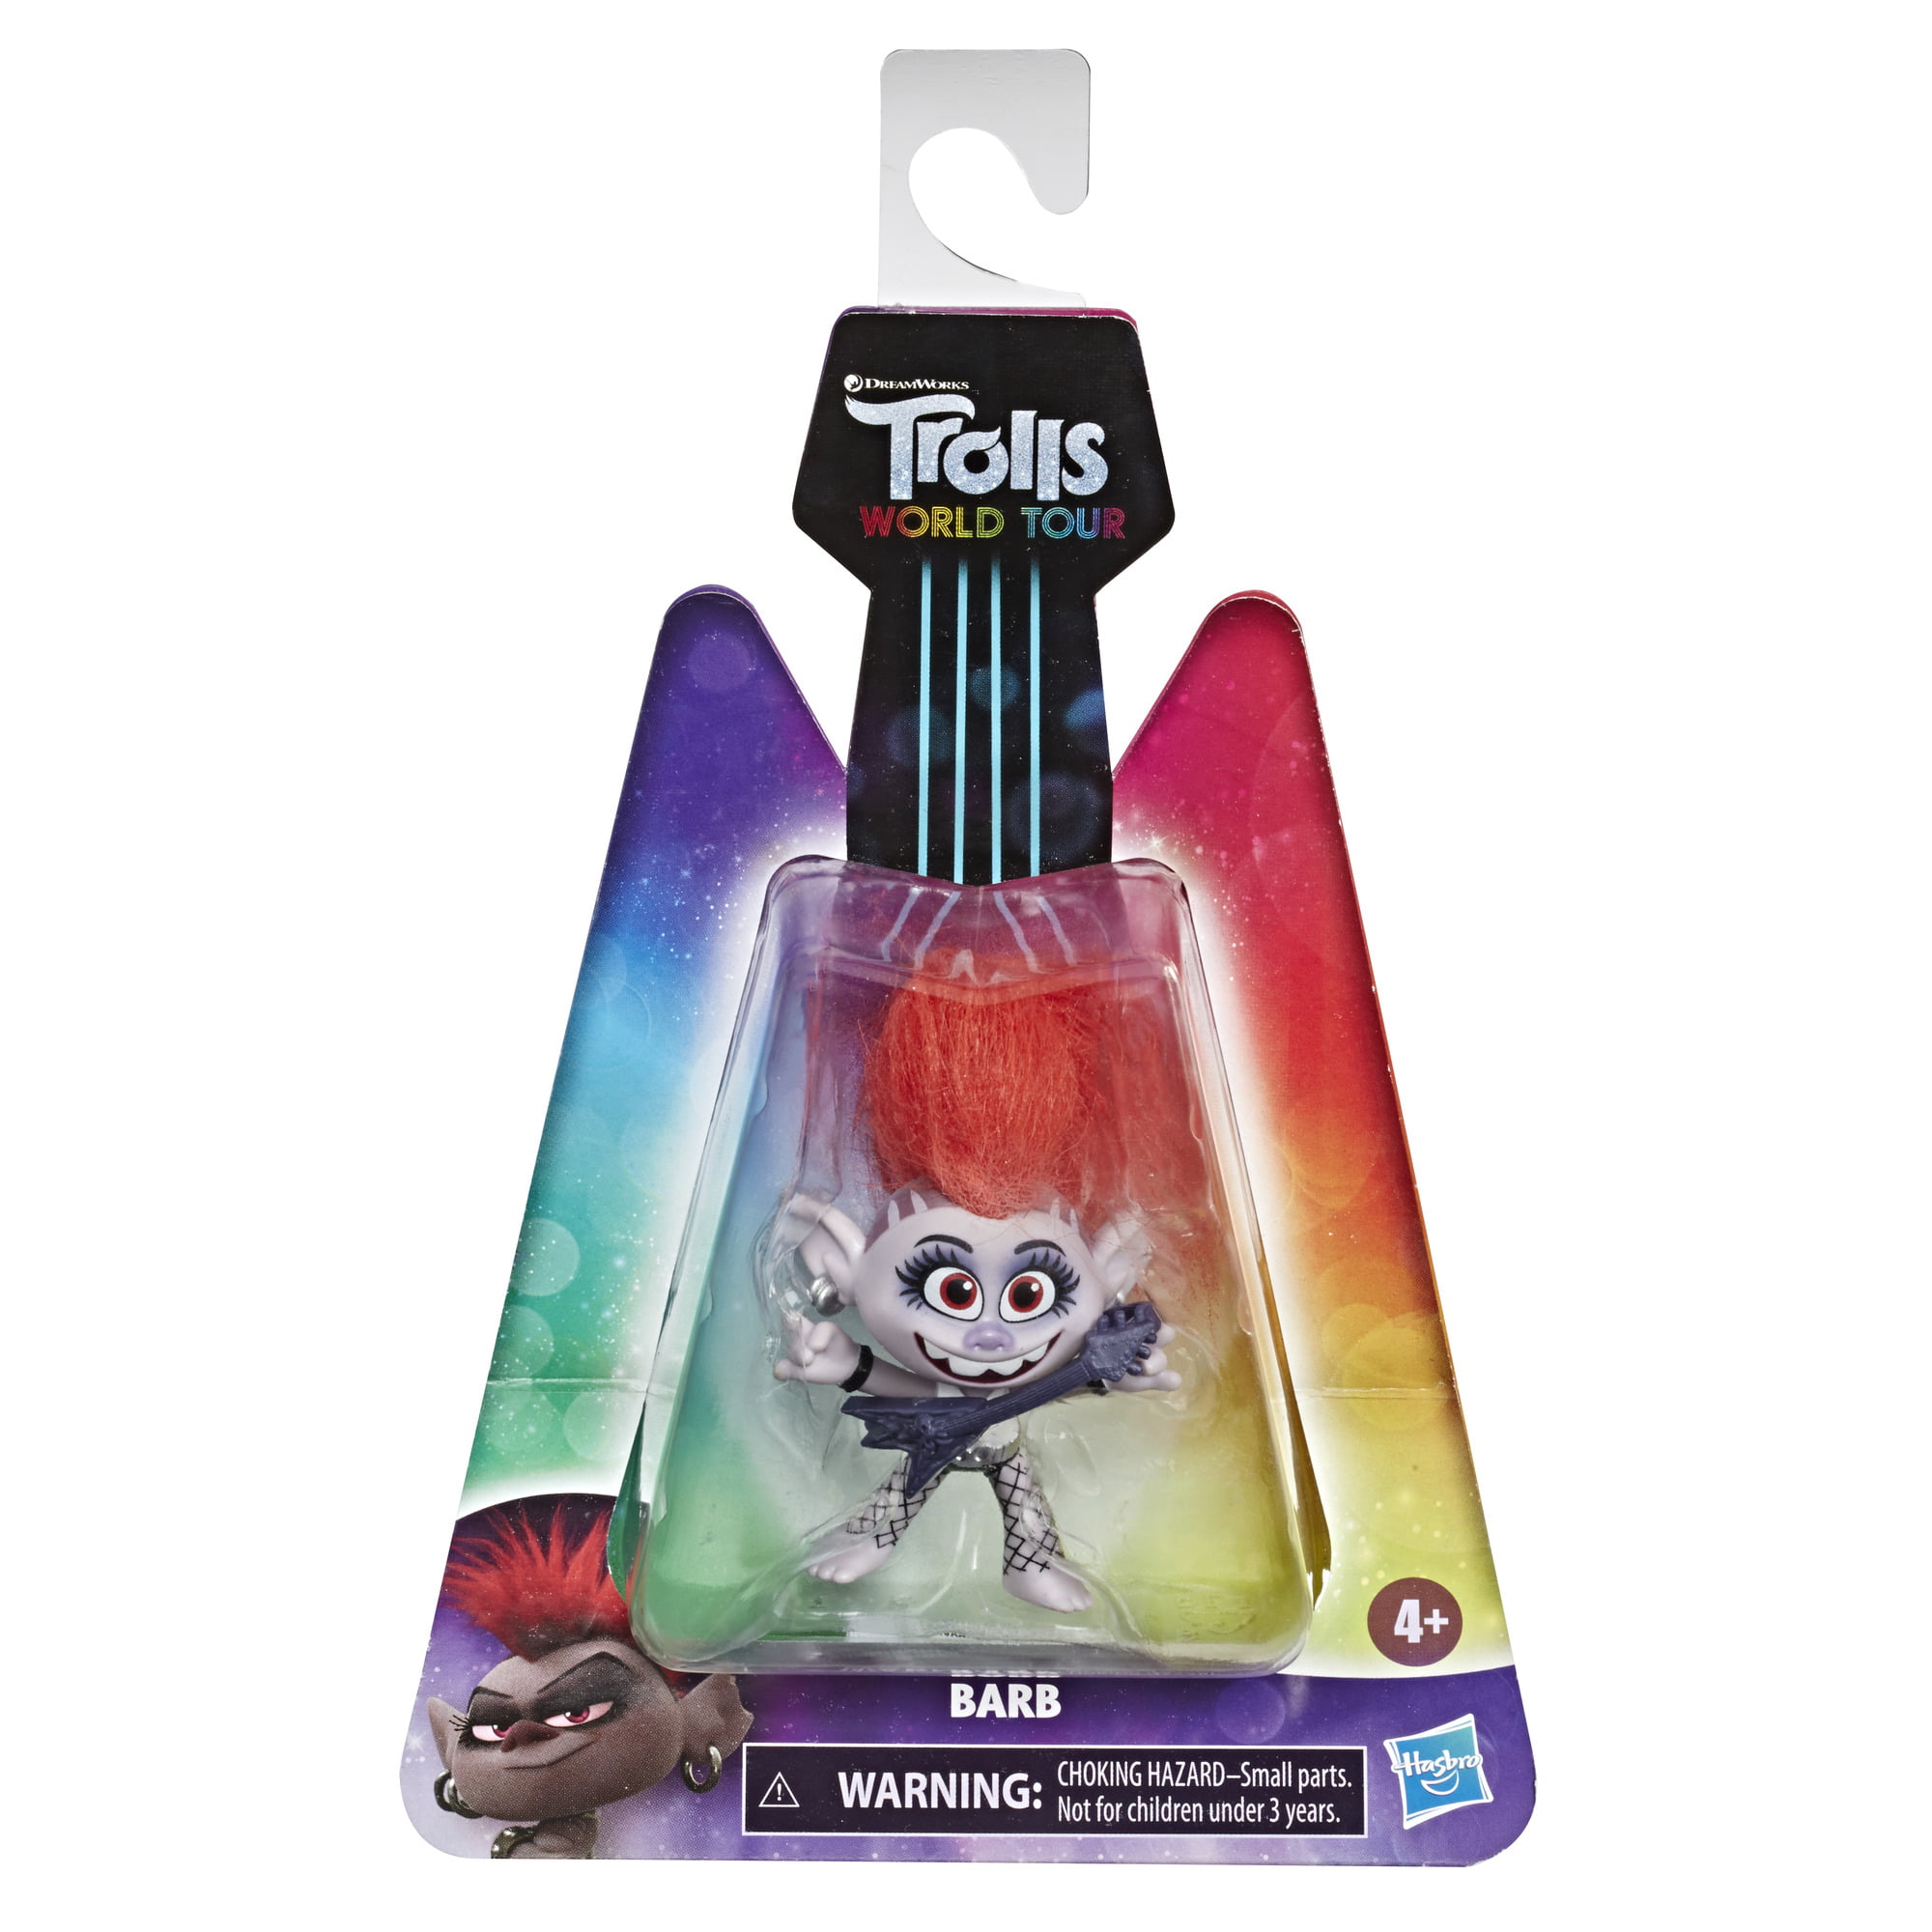 Brand New Trolls World Tour Paint Your Own Figures Barb & Poppy 